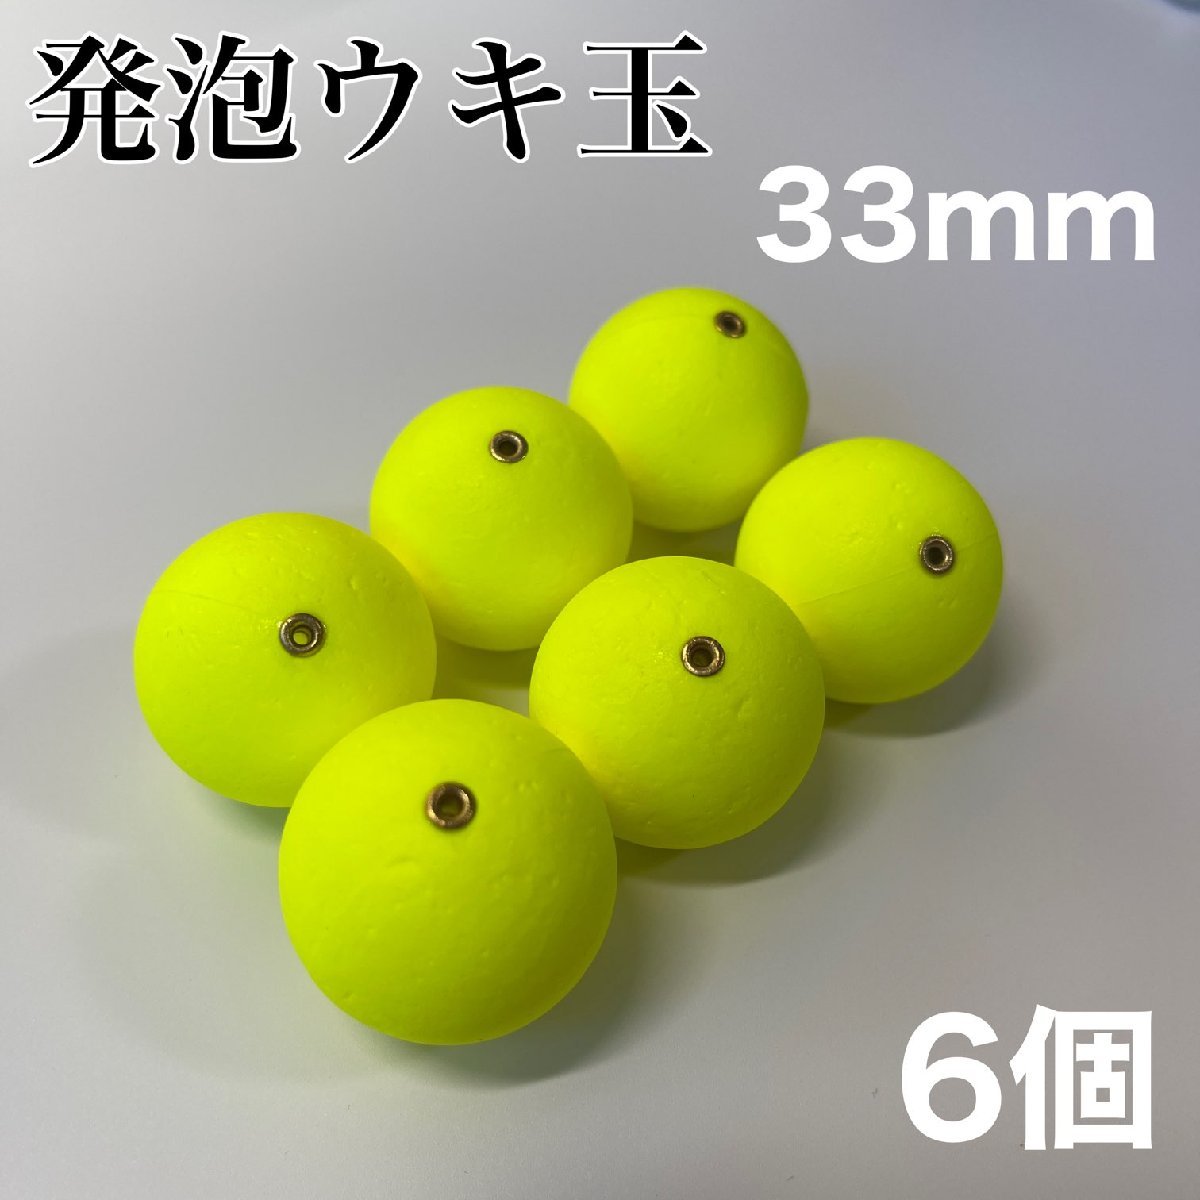  foamed float 33mm yellow yellow color 6 piece middle through .4 number .... rust ki... fishing fishing 